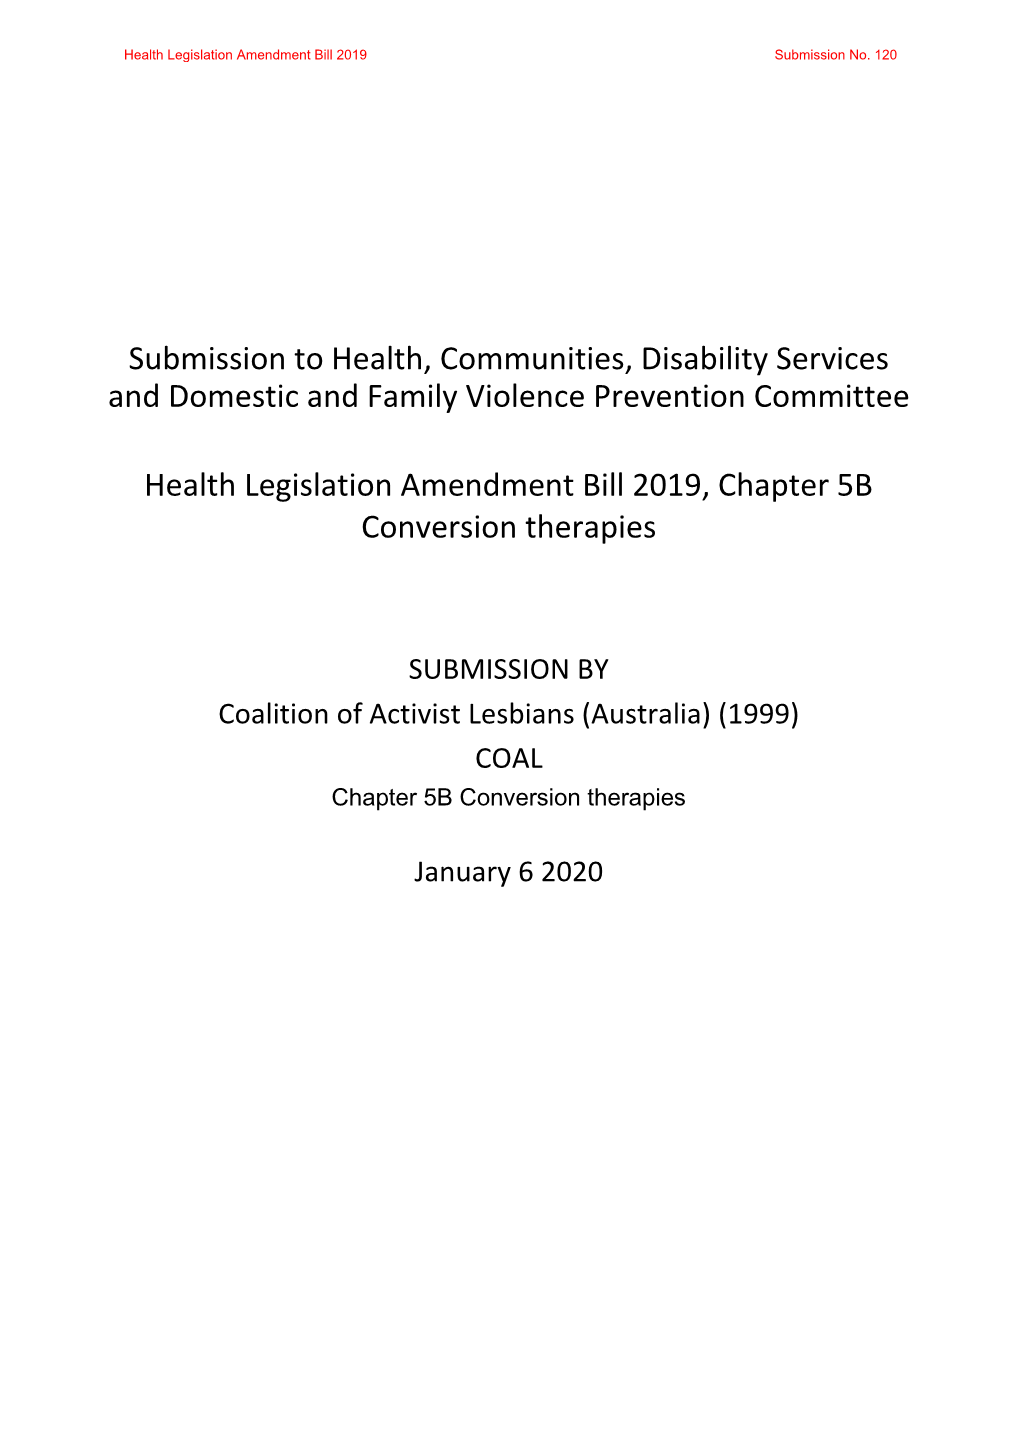 Submission to Health, Communities, Disability Services and Domestic and Family Violence Prevention Committee Health Legislation